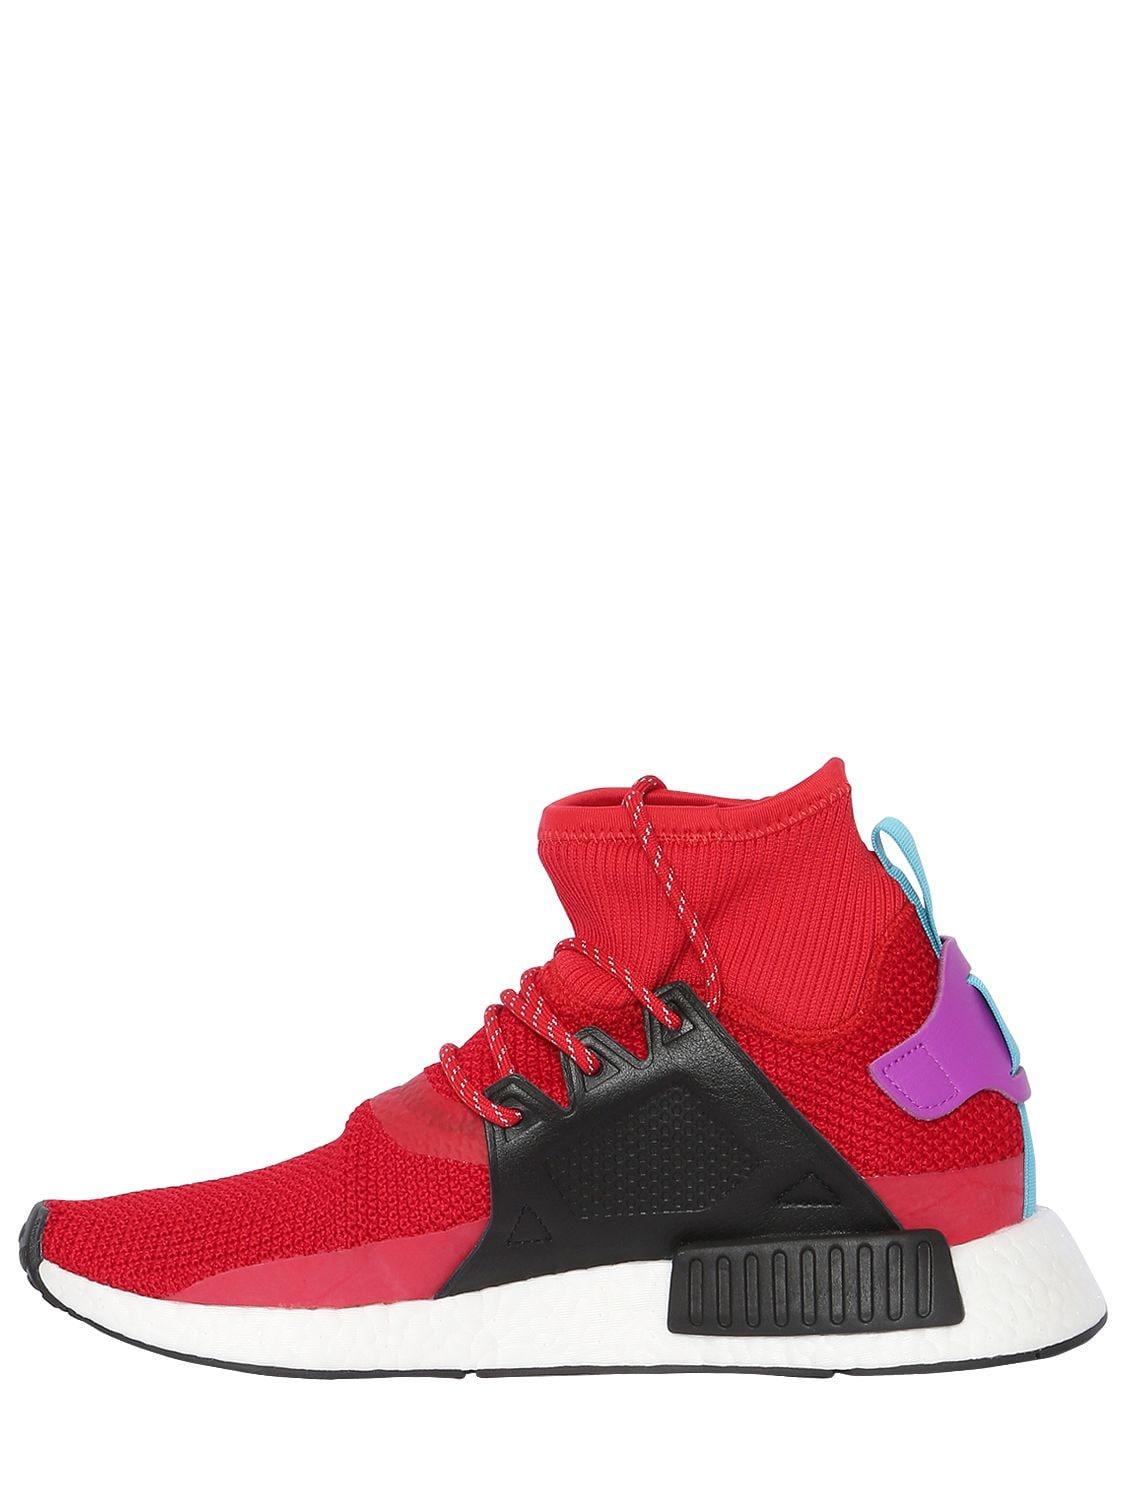 adidas Originals Nmd_xr1 Winter Running Shoe in Red for Men - Save 57% -  Lyst